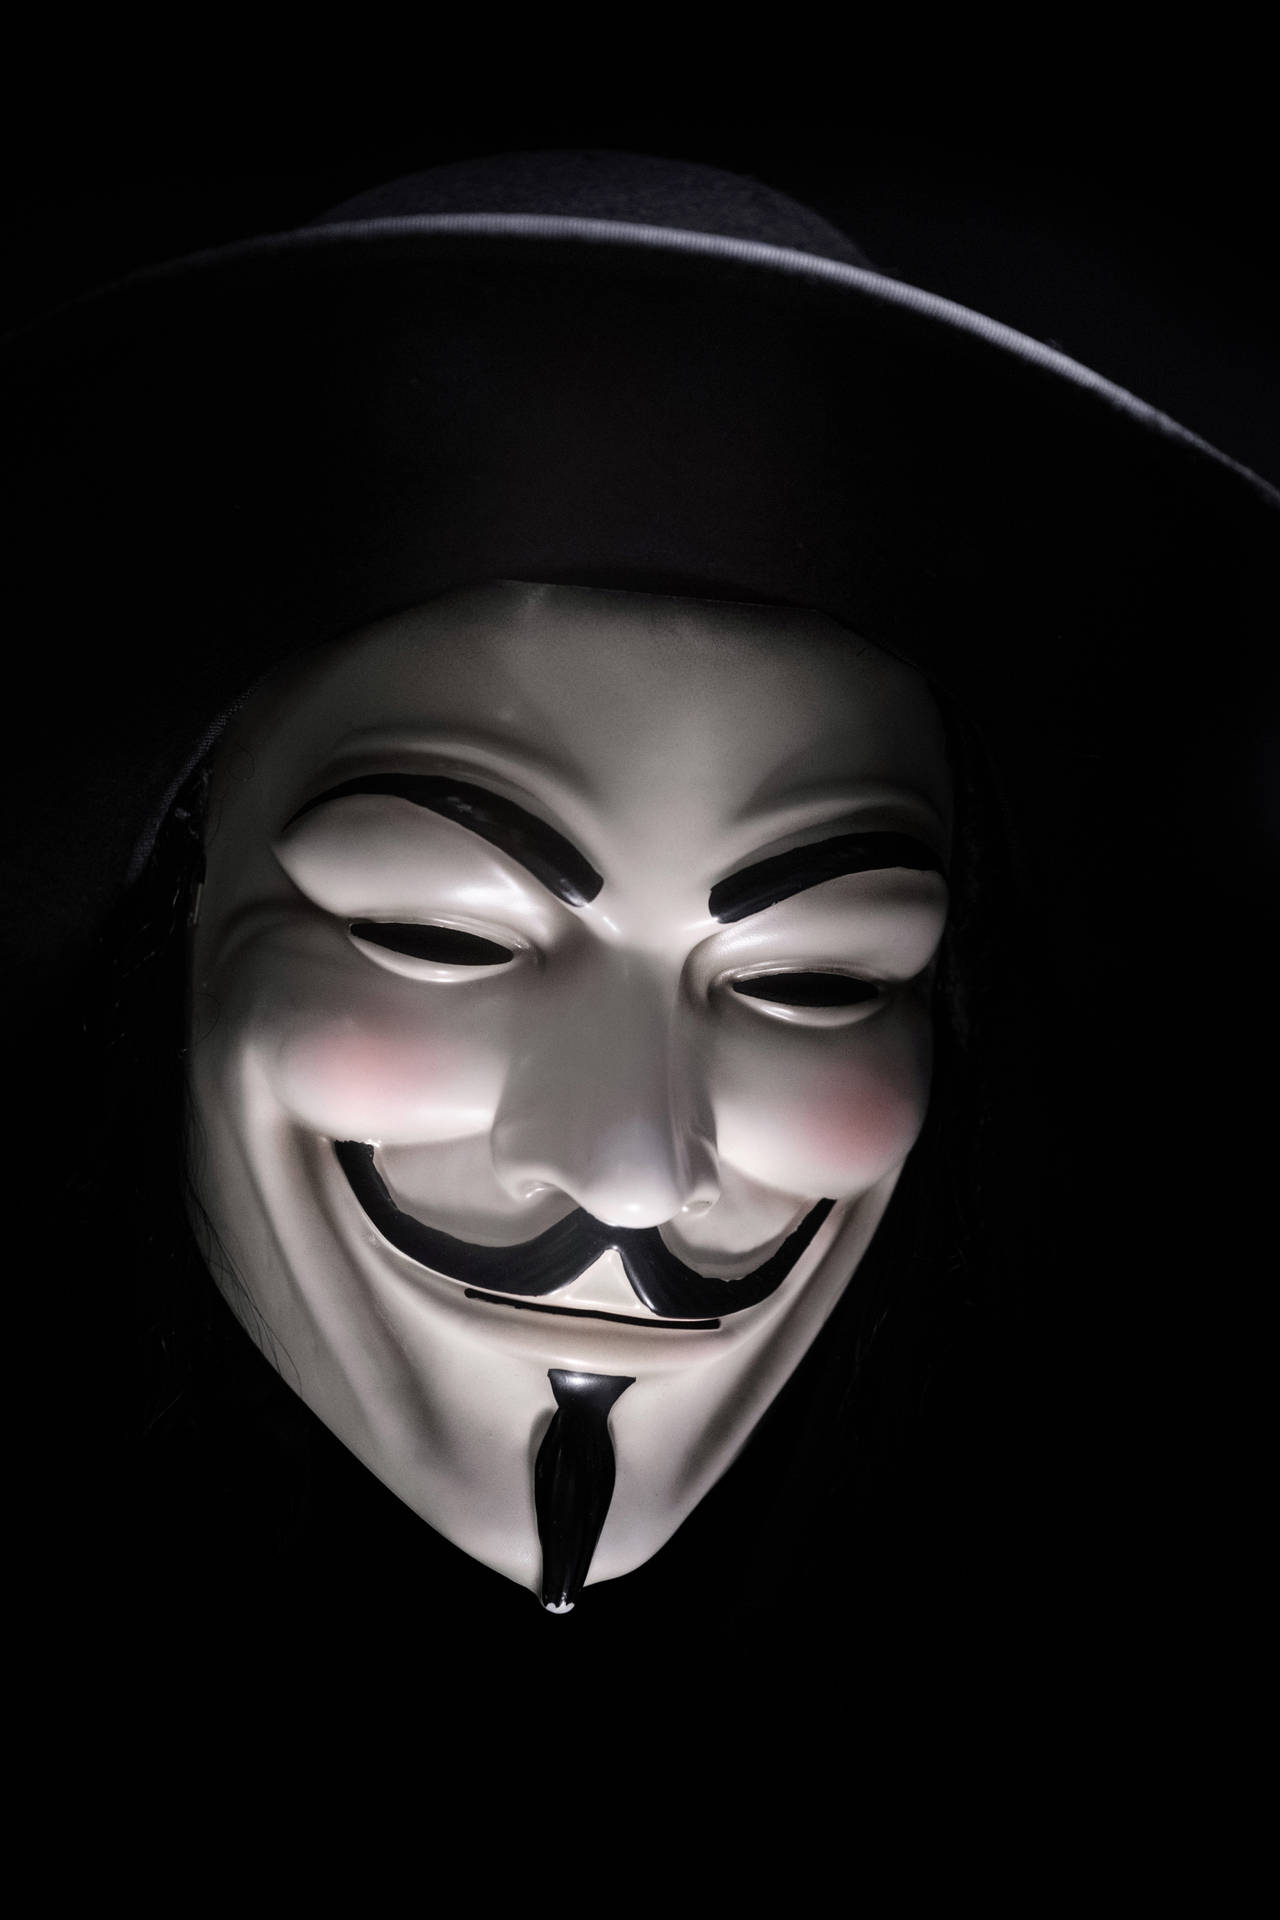 Celebrate the spirit of Anonymous with the famous Guy Fawkes Mask Wallpaper